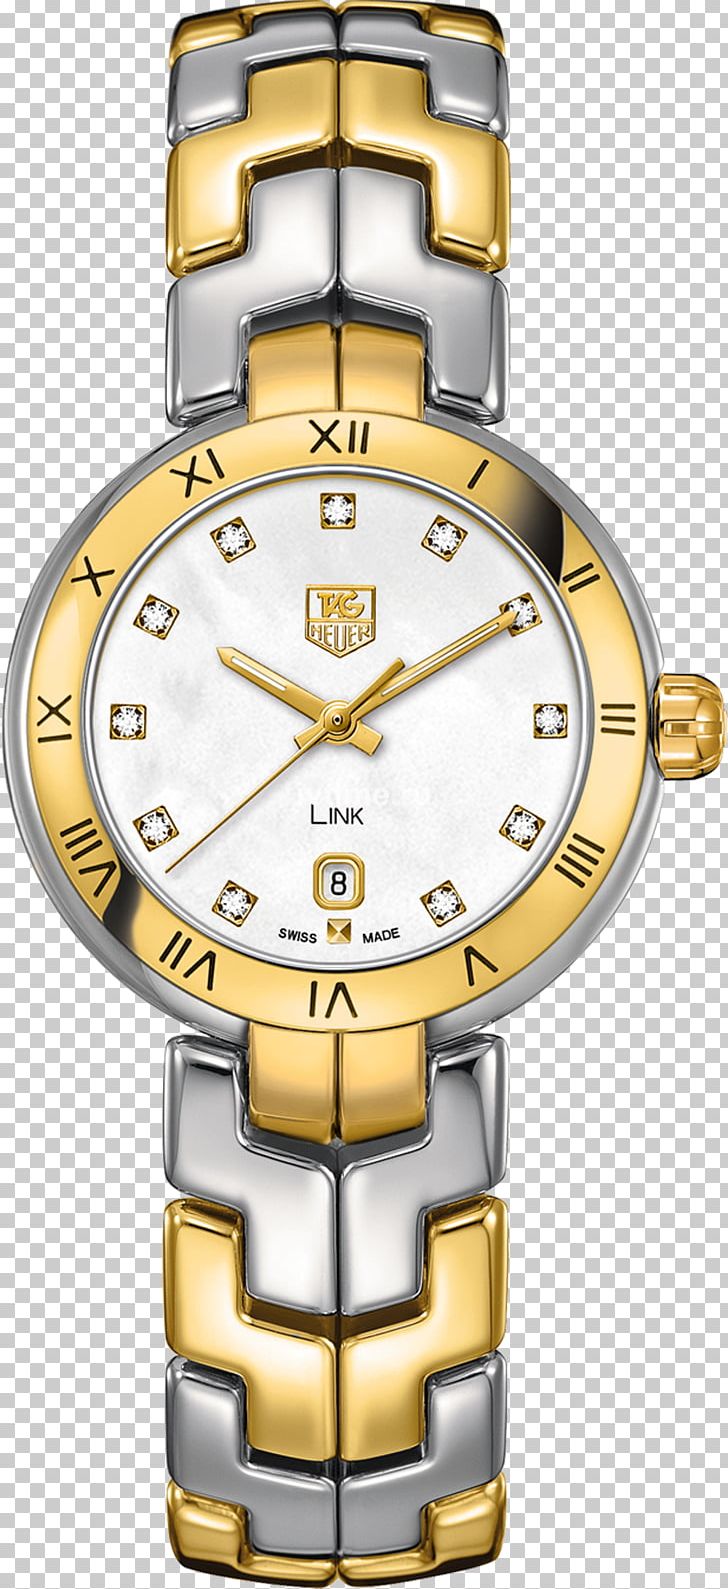 Automatic Watch TAG Heuer Quartz Clock Jewellery PNG, Clipart, Accessories, Automatic Watch, Bracelet, Chronograph, Discounts And Allowances Free PNG Download